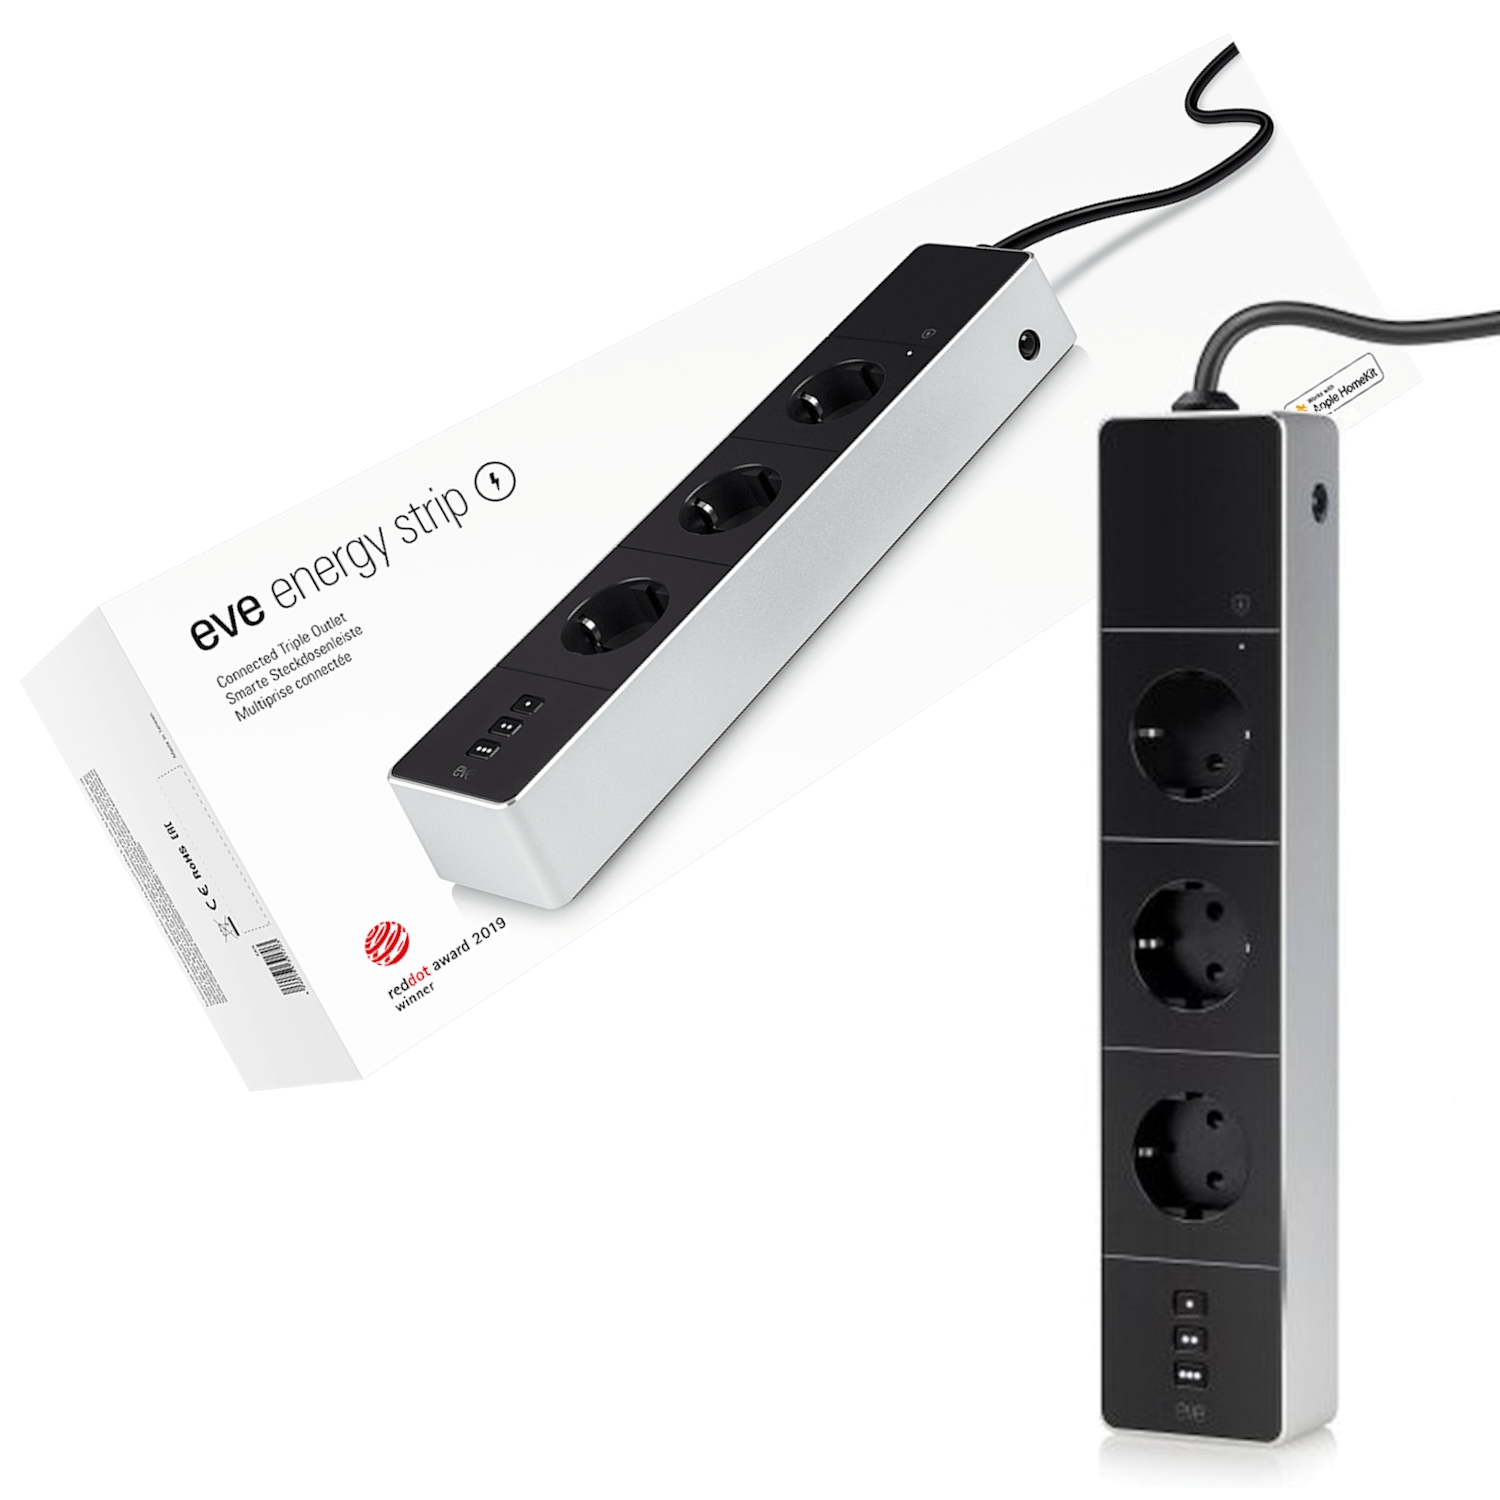 Eve Energy Strip - Connected Triple Outlet - Apple